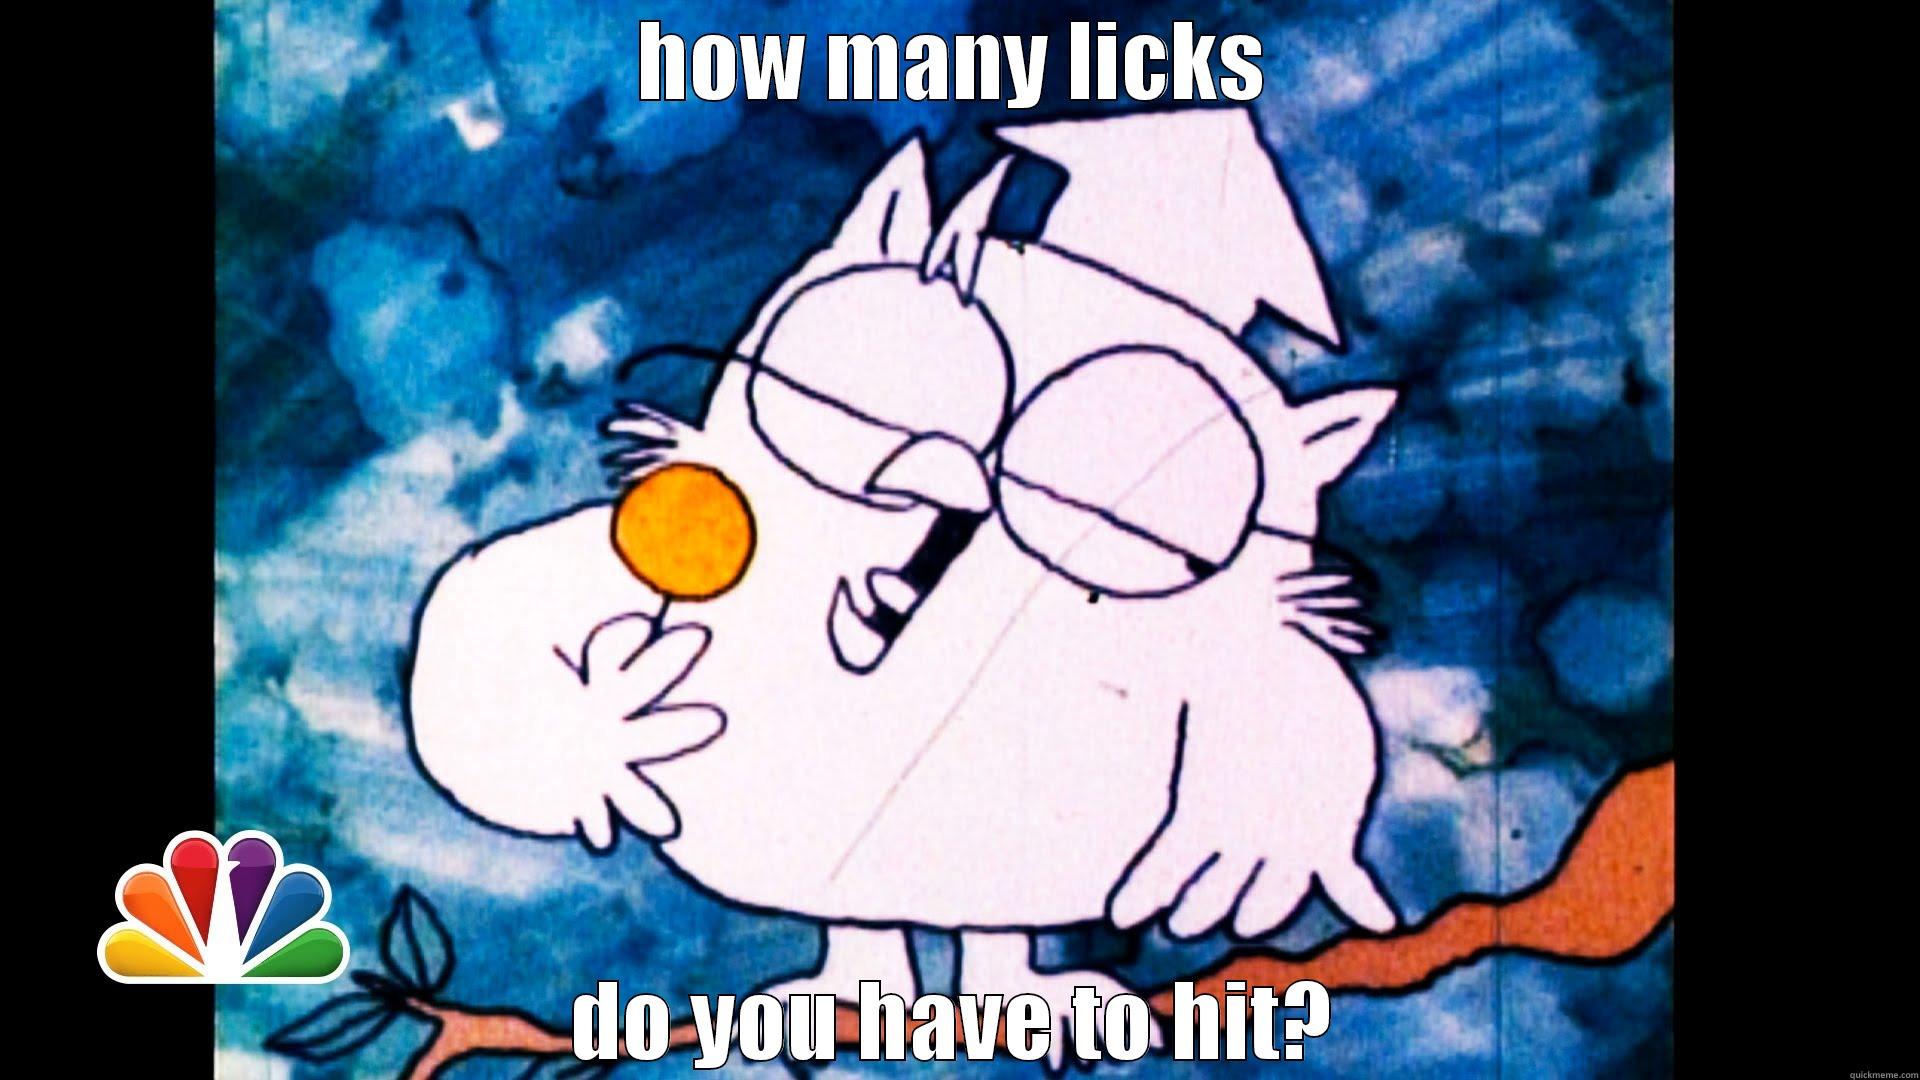 owl hitting licks - HOW MANY LICKS DO YOU HAVE TO HIT? Misc